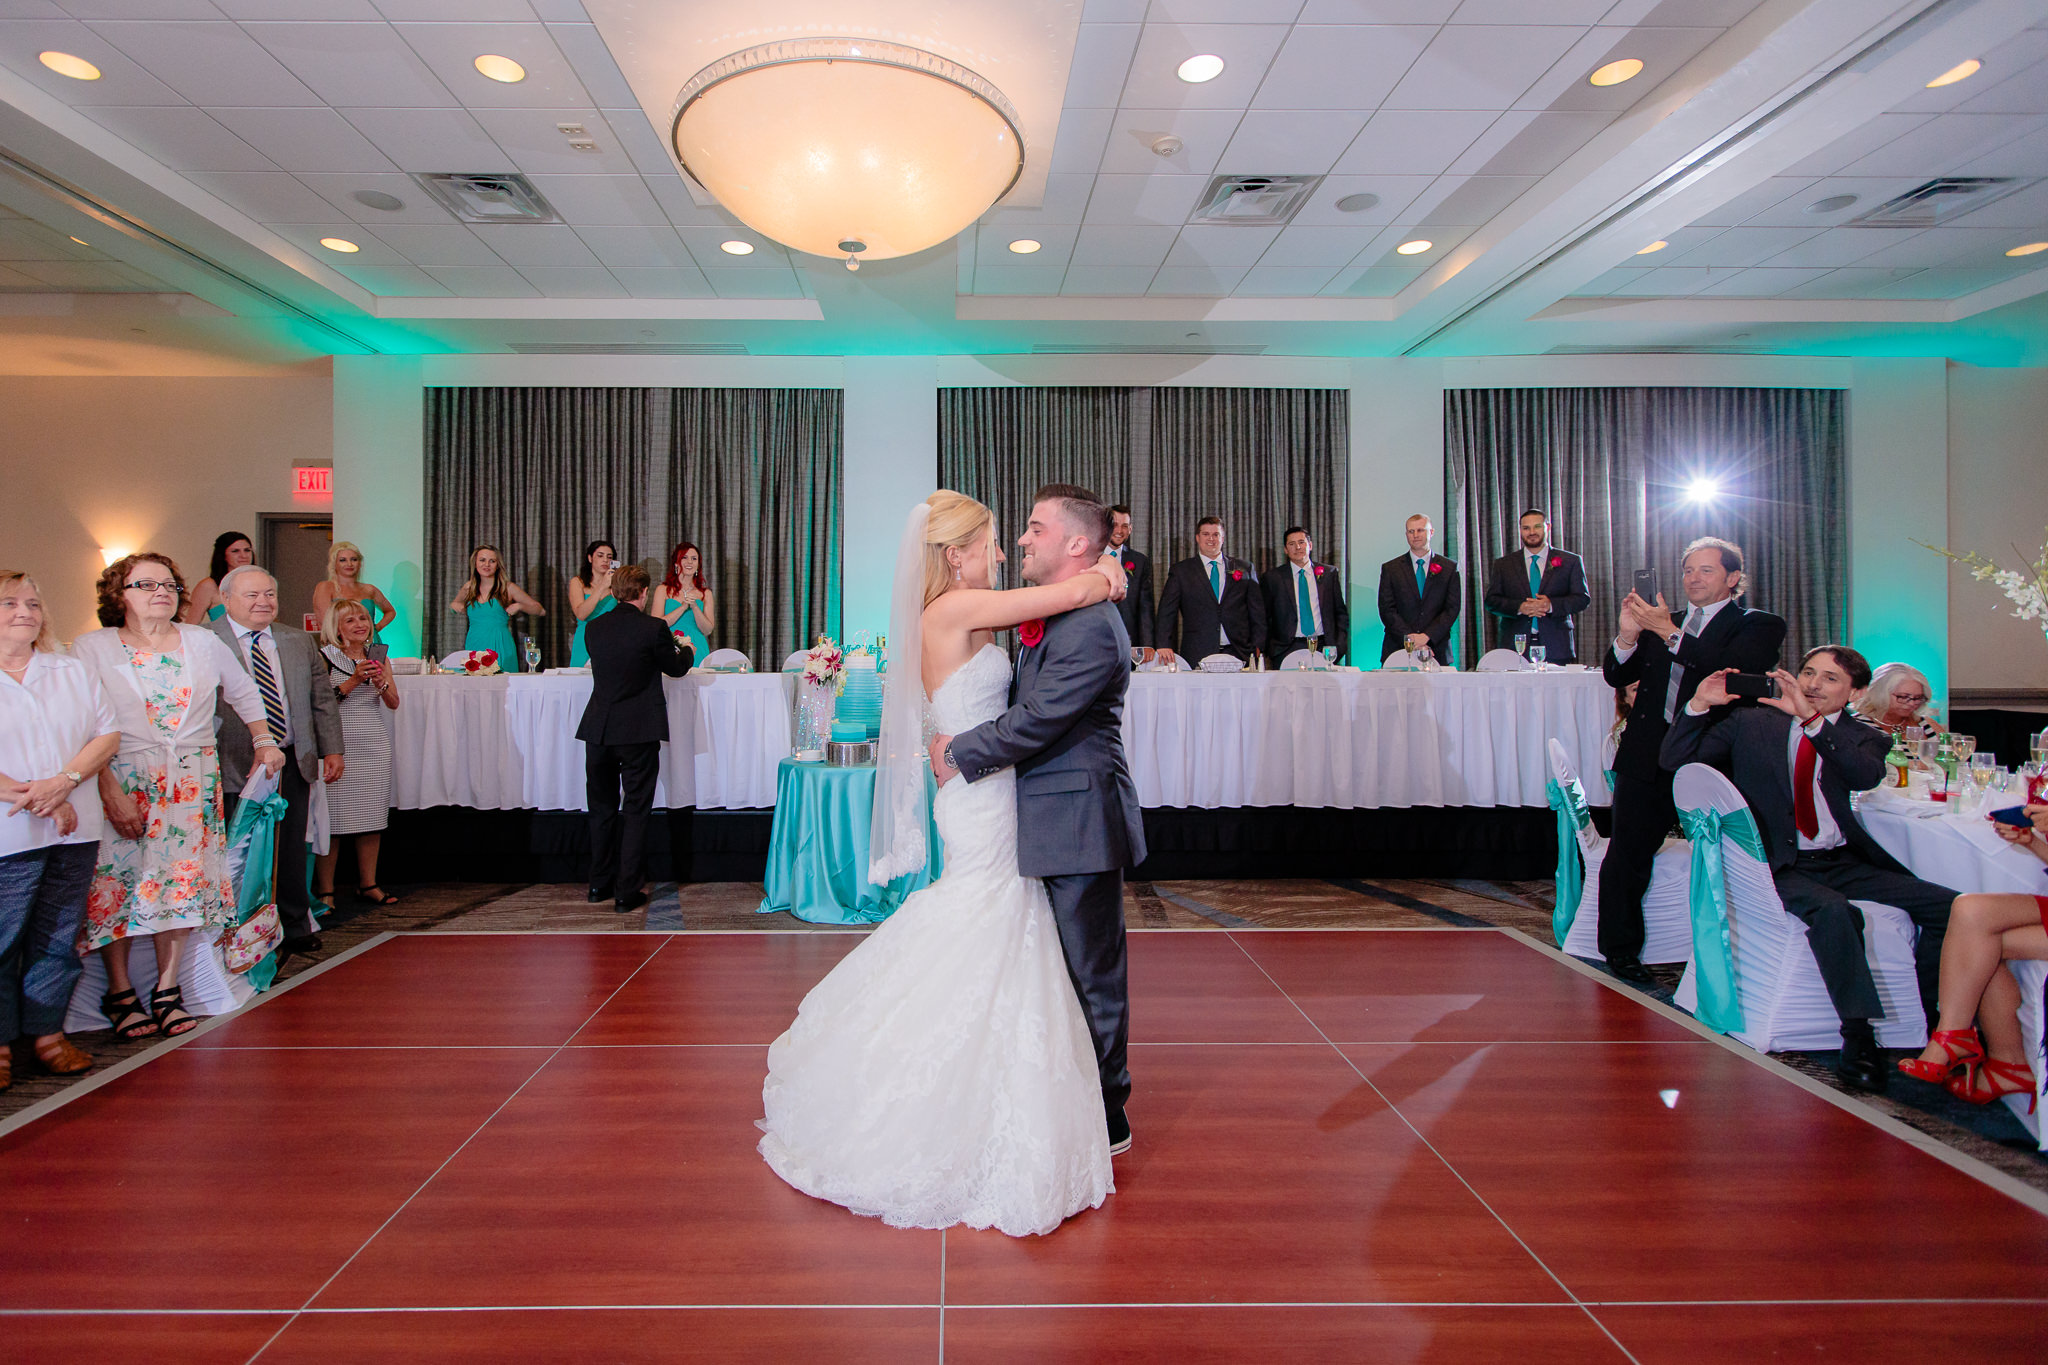 First dance in the Three Rivers Ballroom of the Pittsburgh Airport Marriott